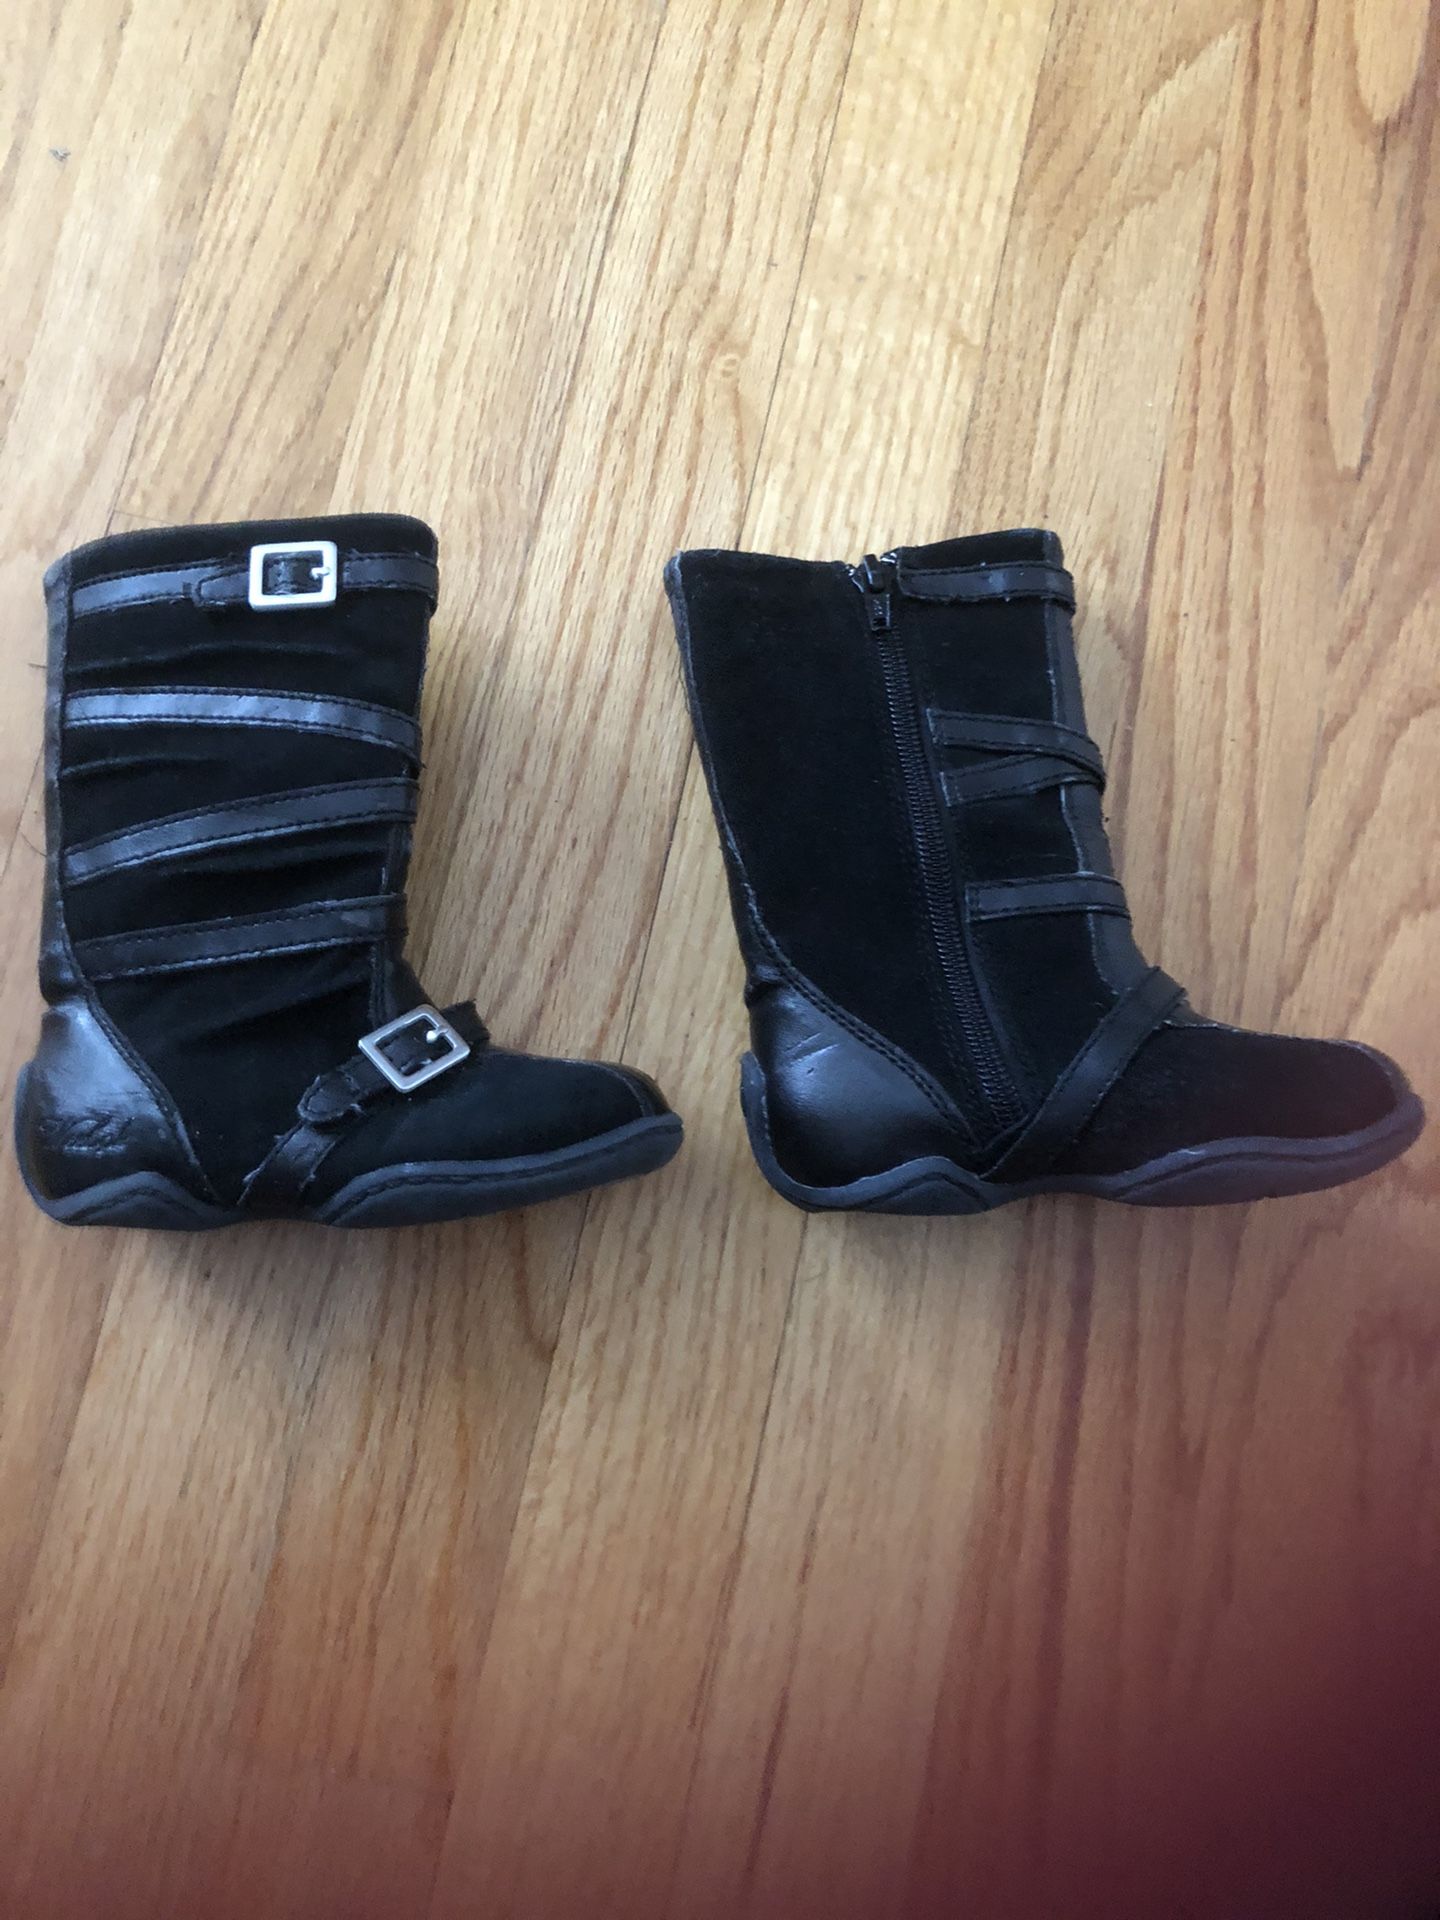 Girl toddler boots size 6